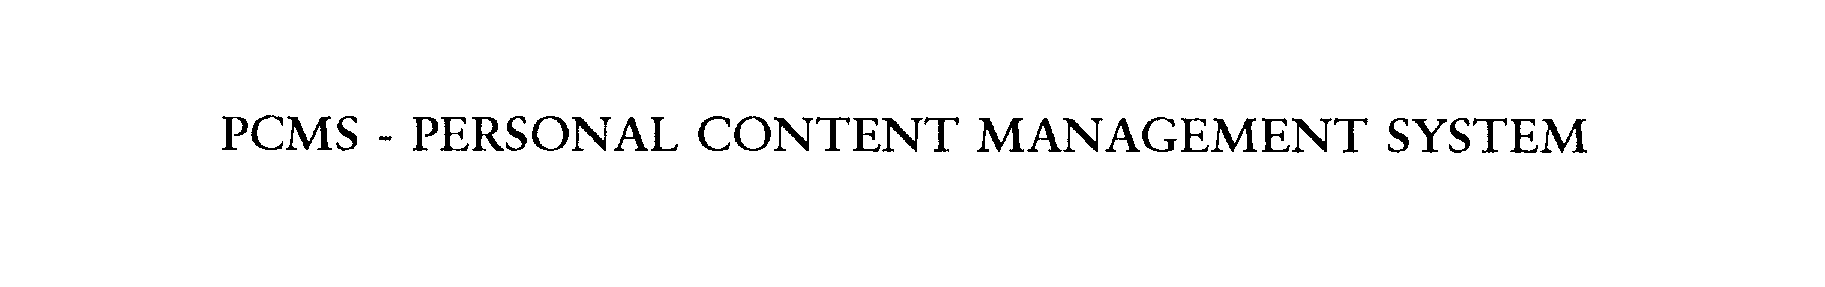 Trademark Logo PCMS - PERSONAL CONTENT MANAGEMENT SYSTEM